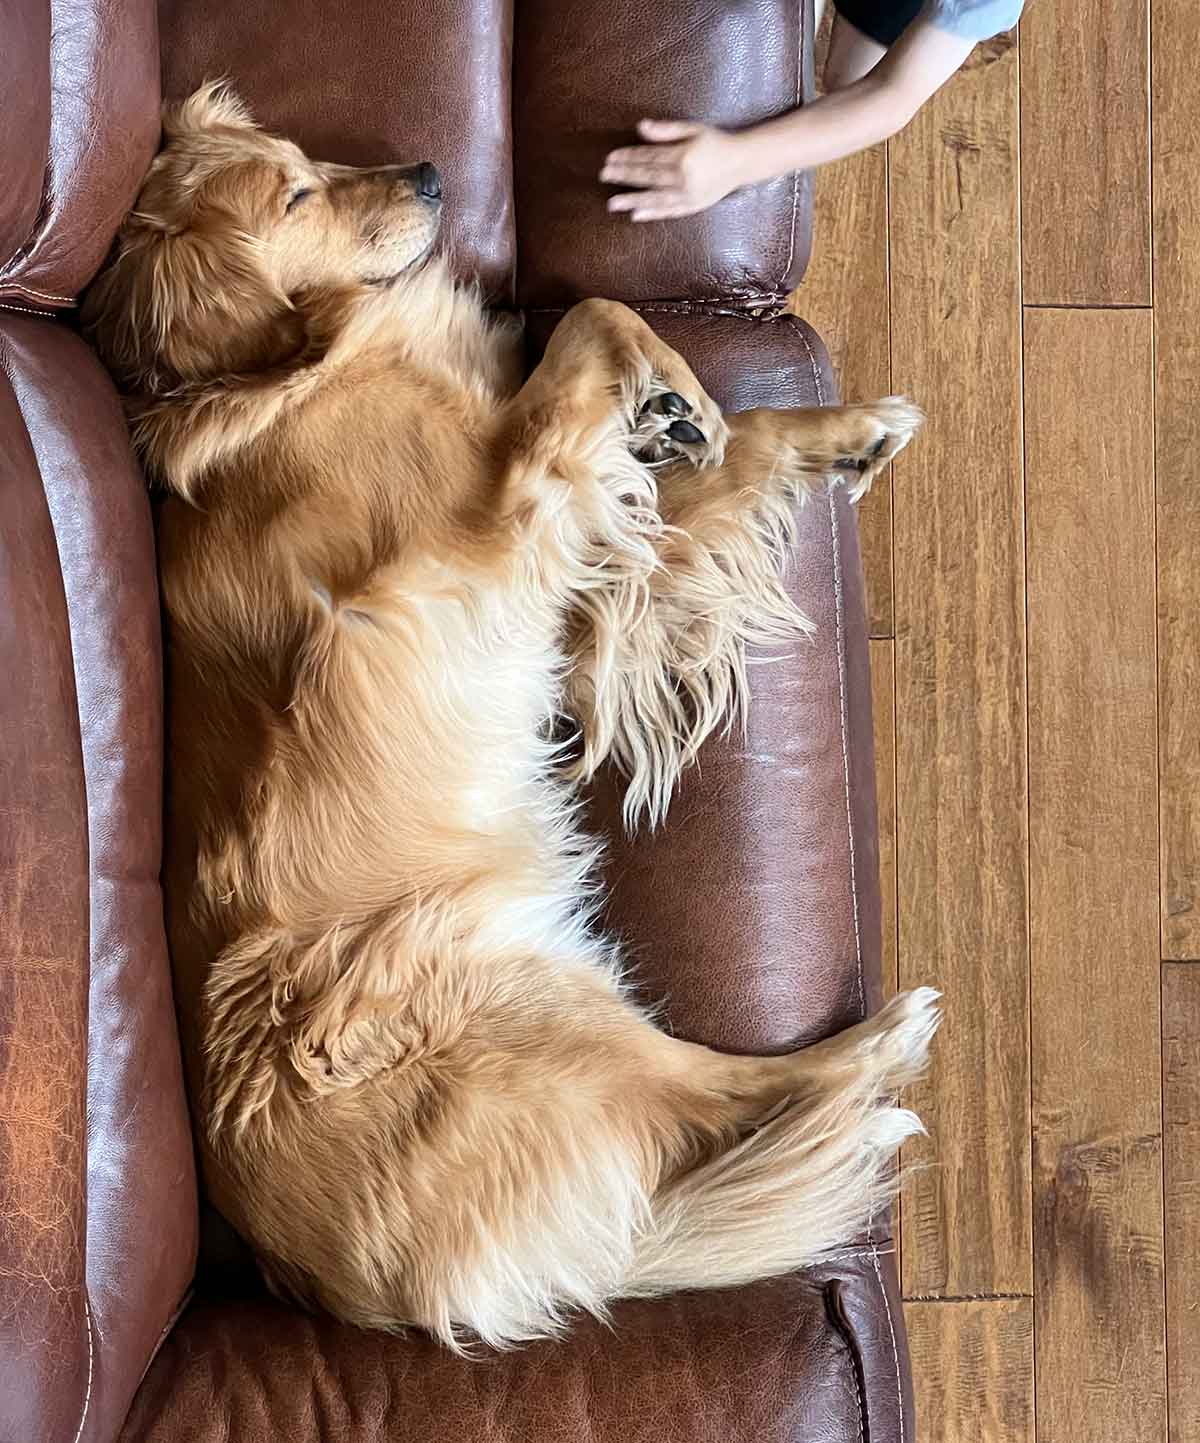 Golden retriever sleeping on a brown leather couch.